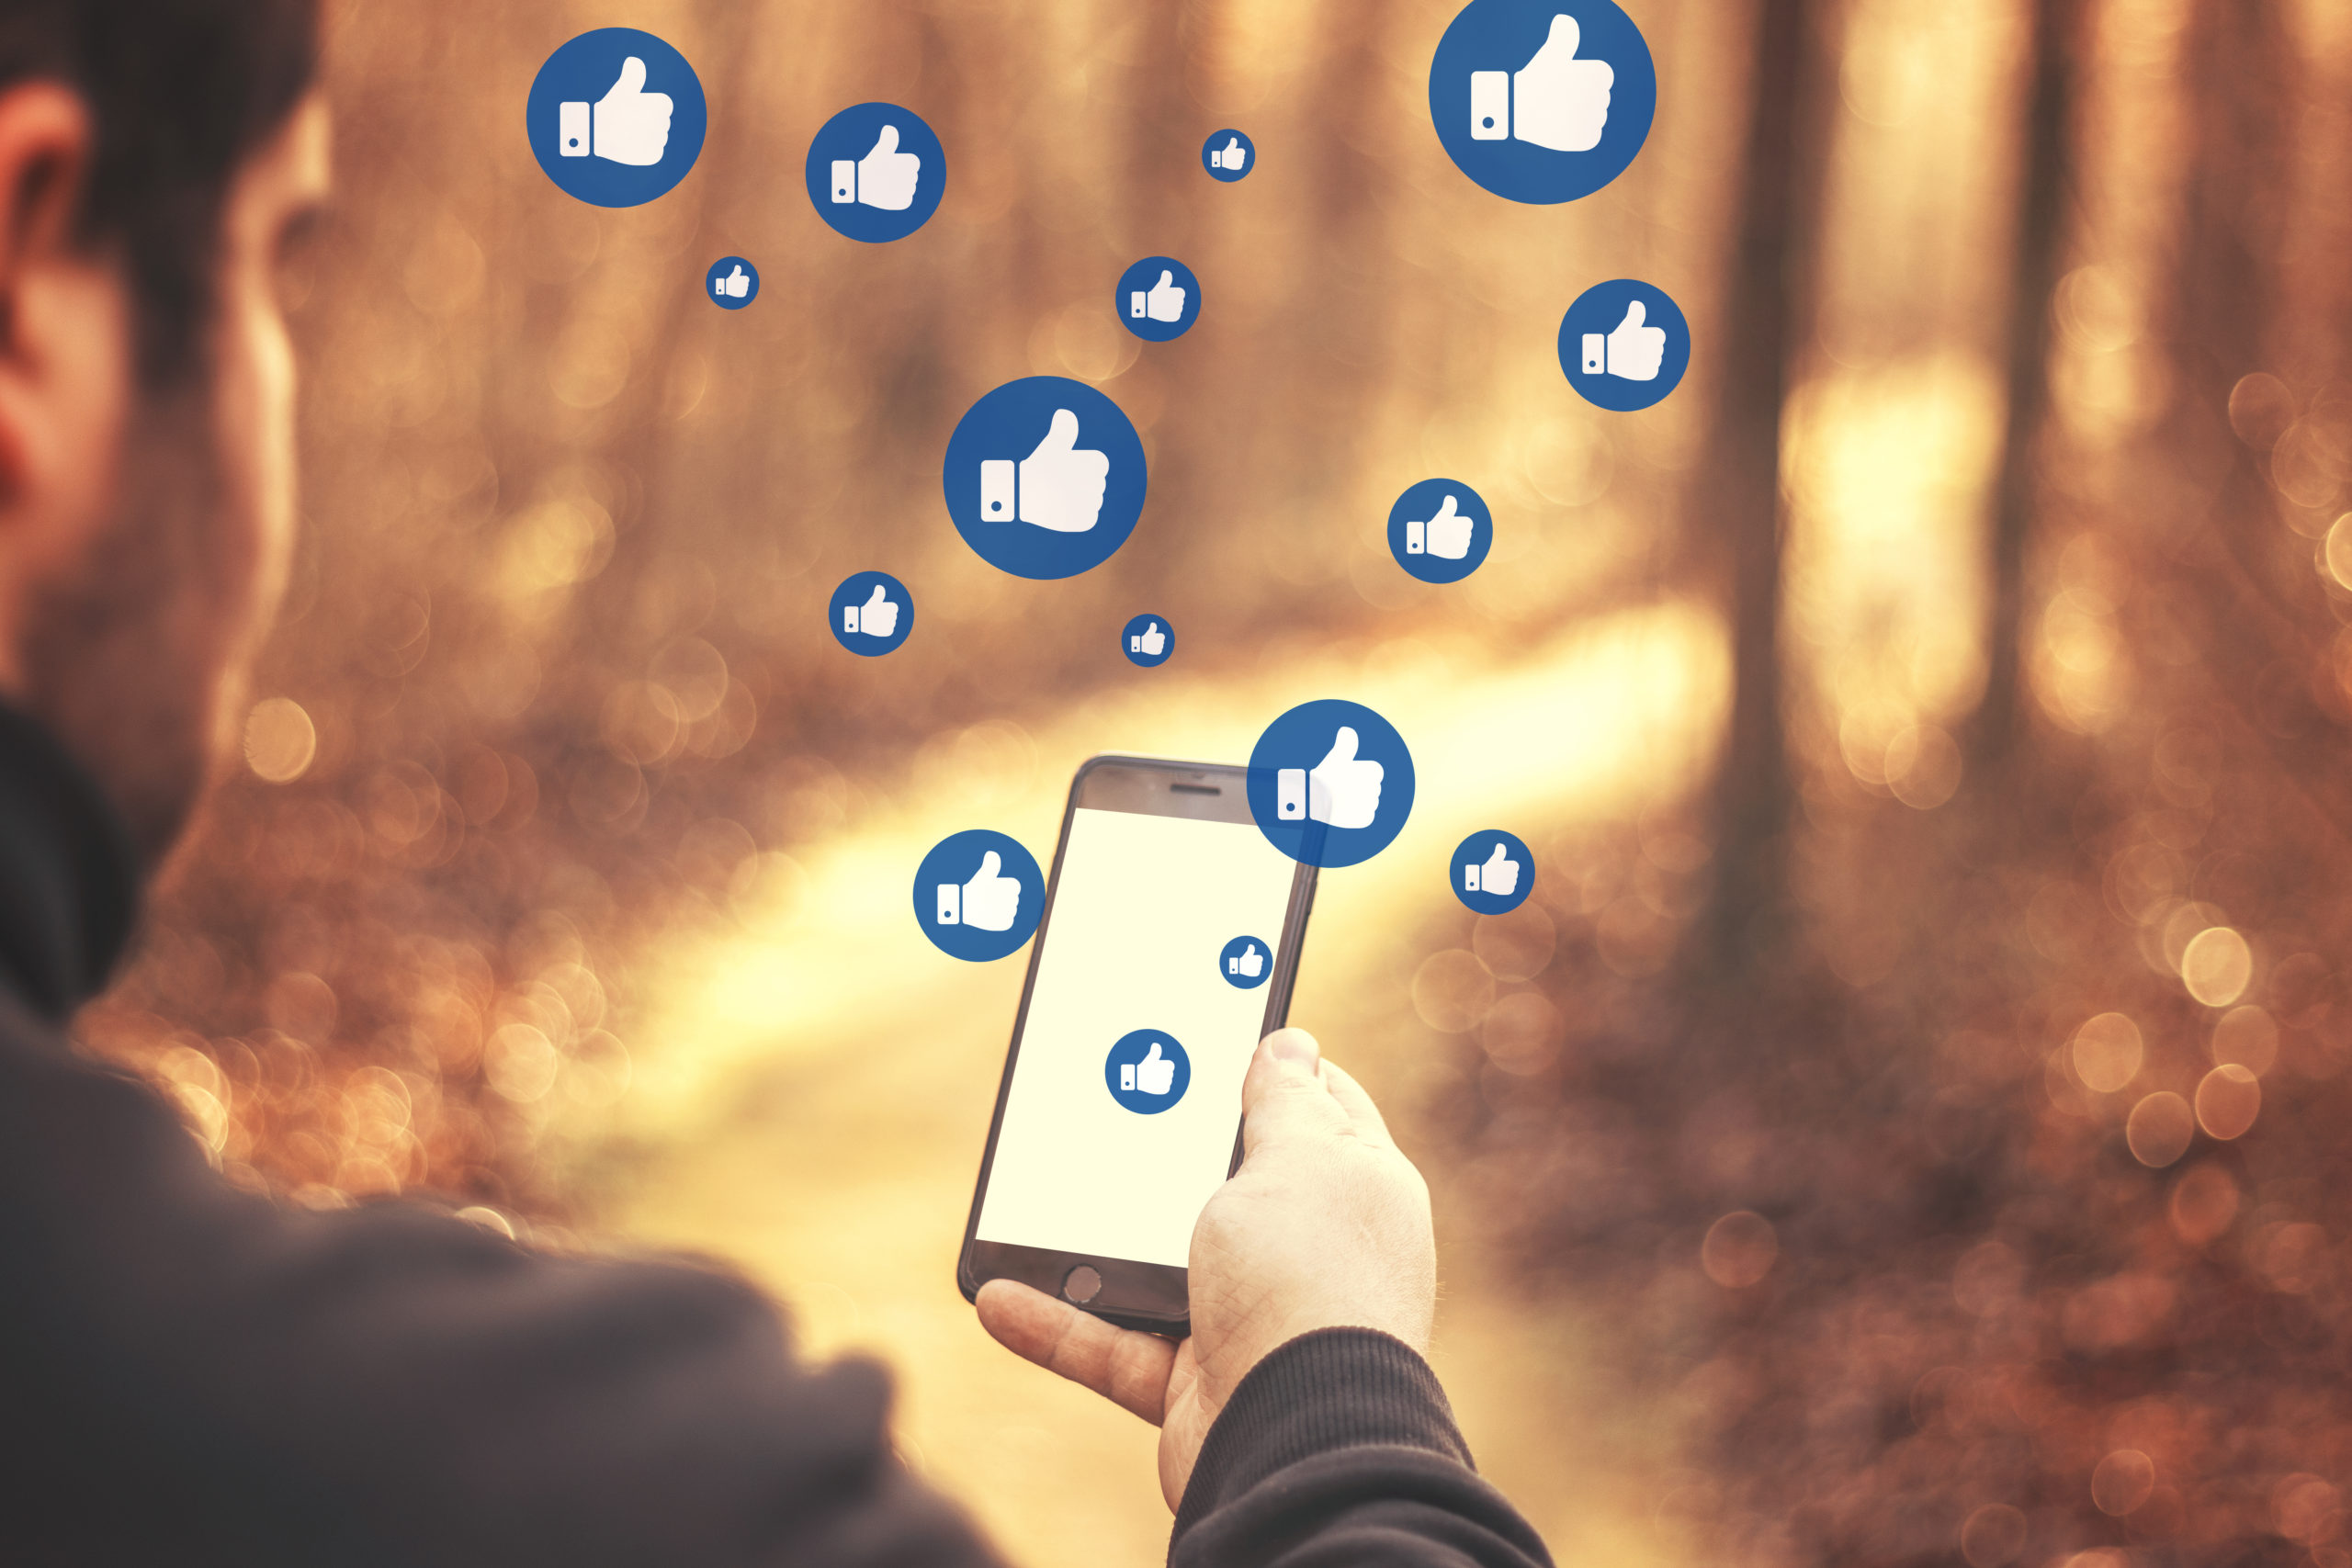 Young man watching Facebook on his smartphone during a walk in the forest - multitude of thumbs up like icons in speech bubbles - life style and social networks